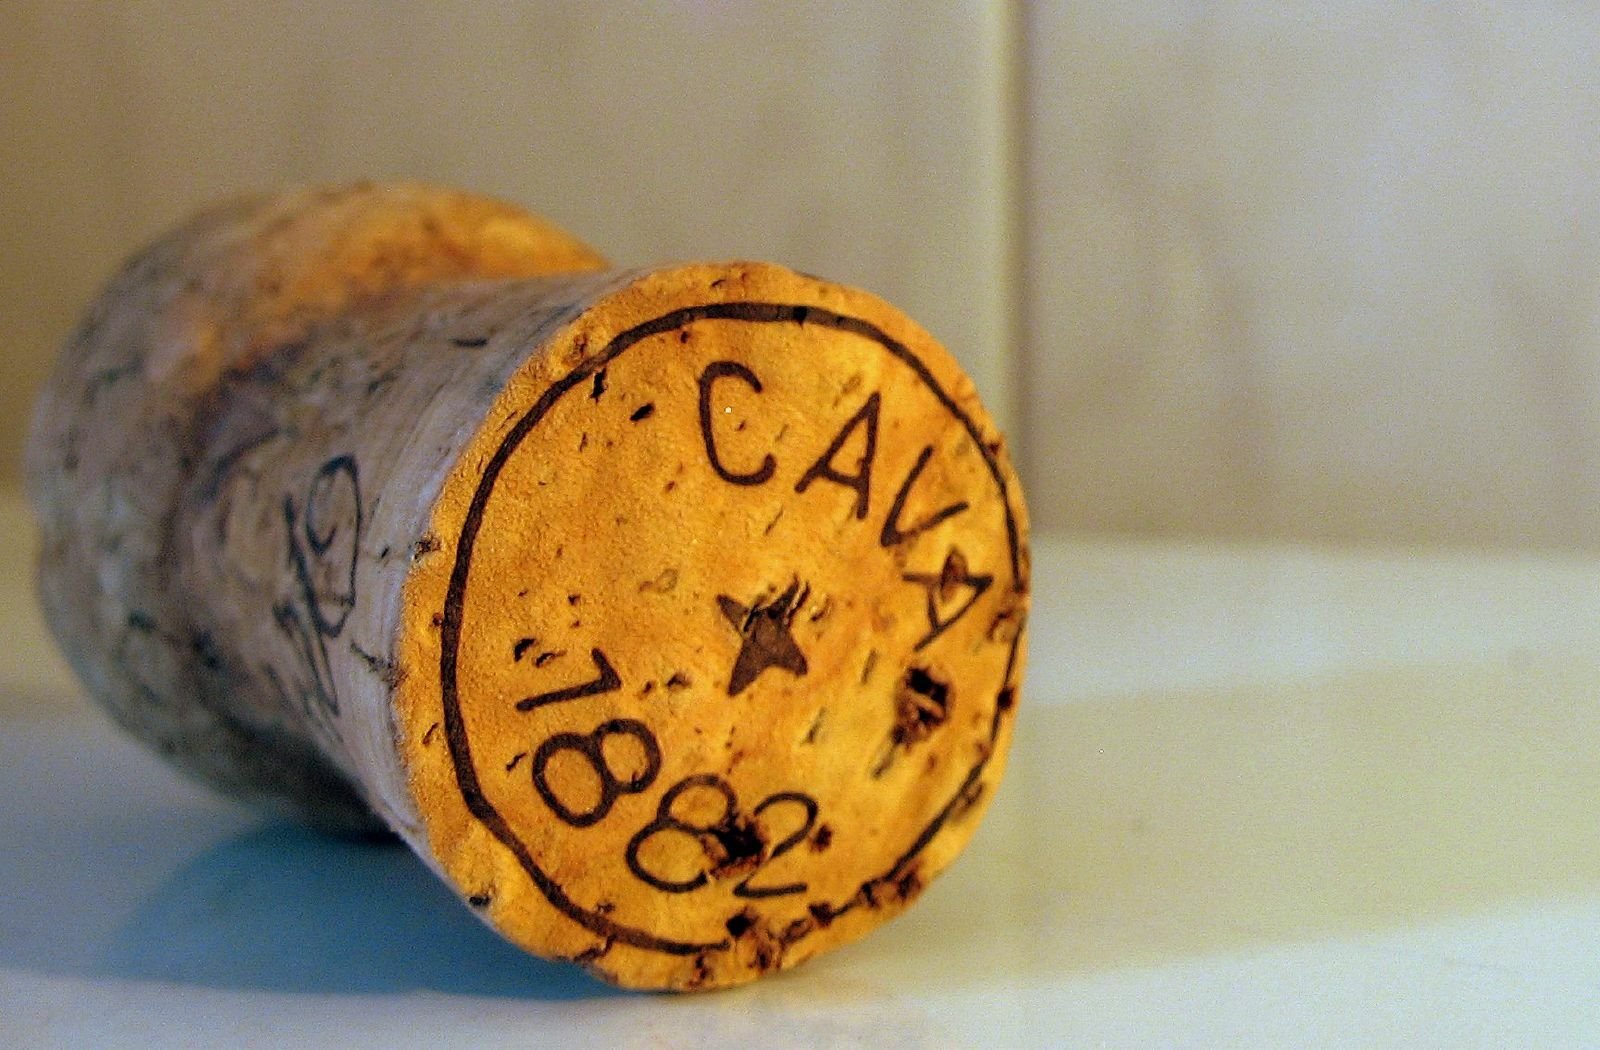 A cork from a cava bottle sits on a counter top